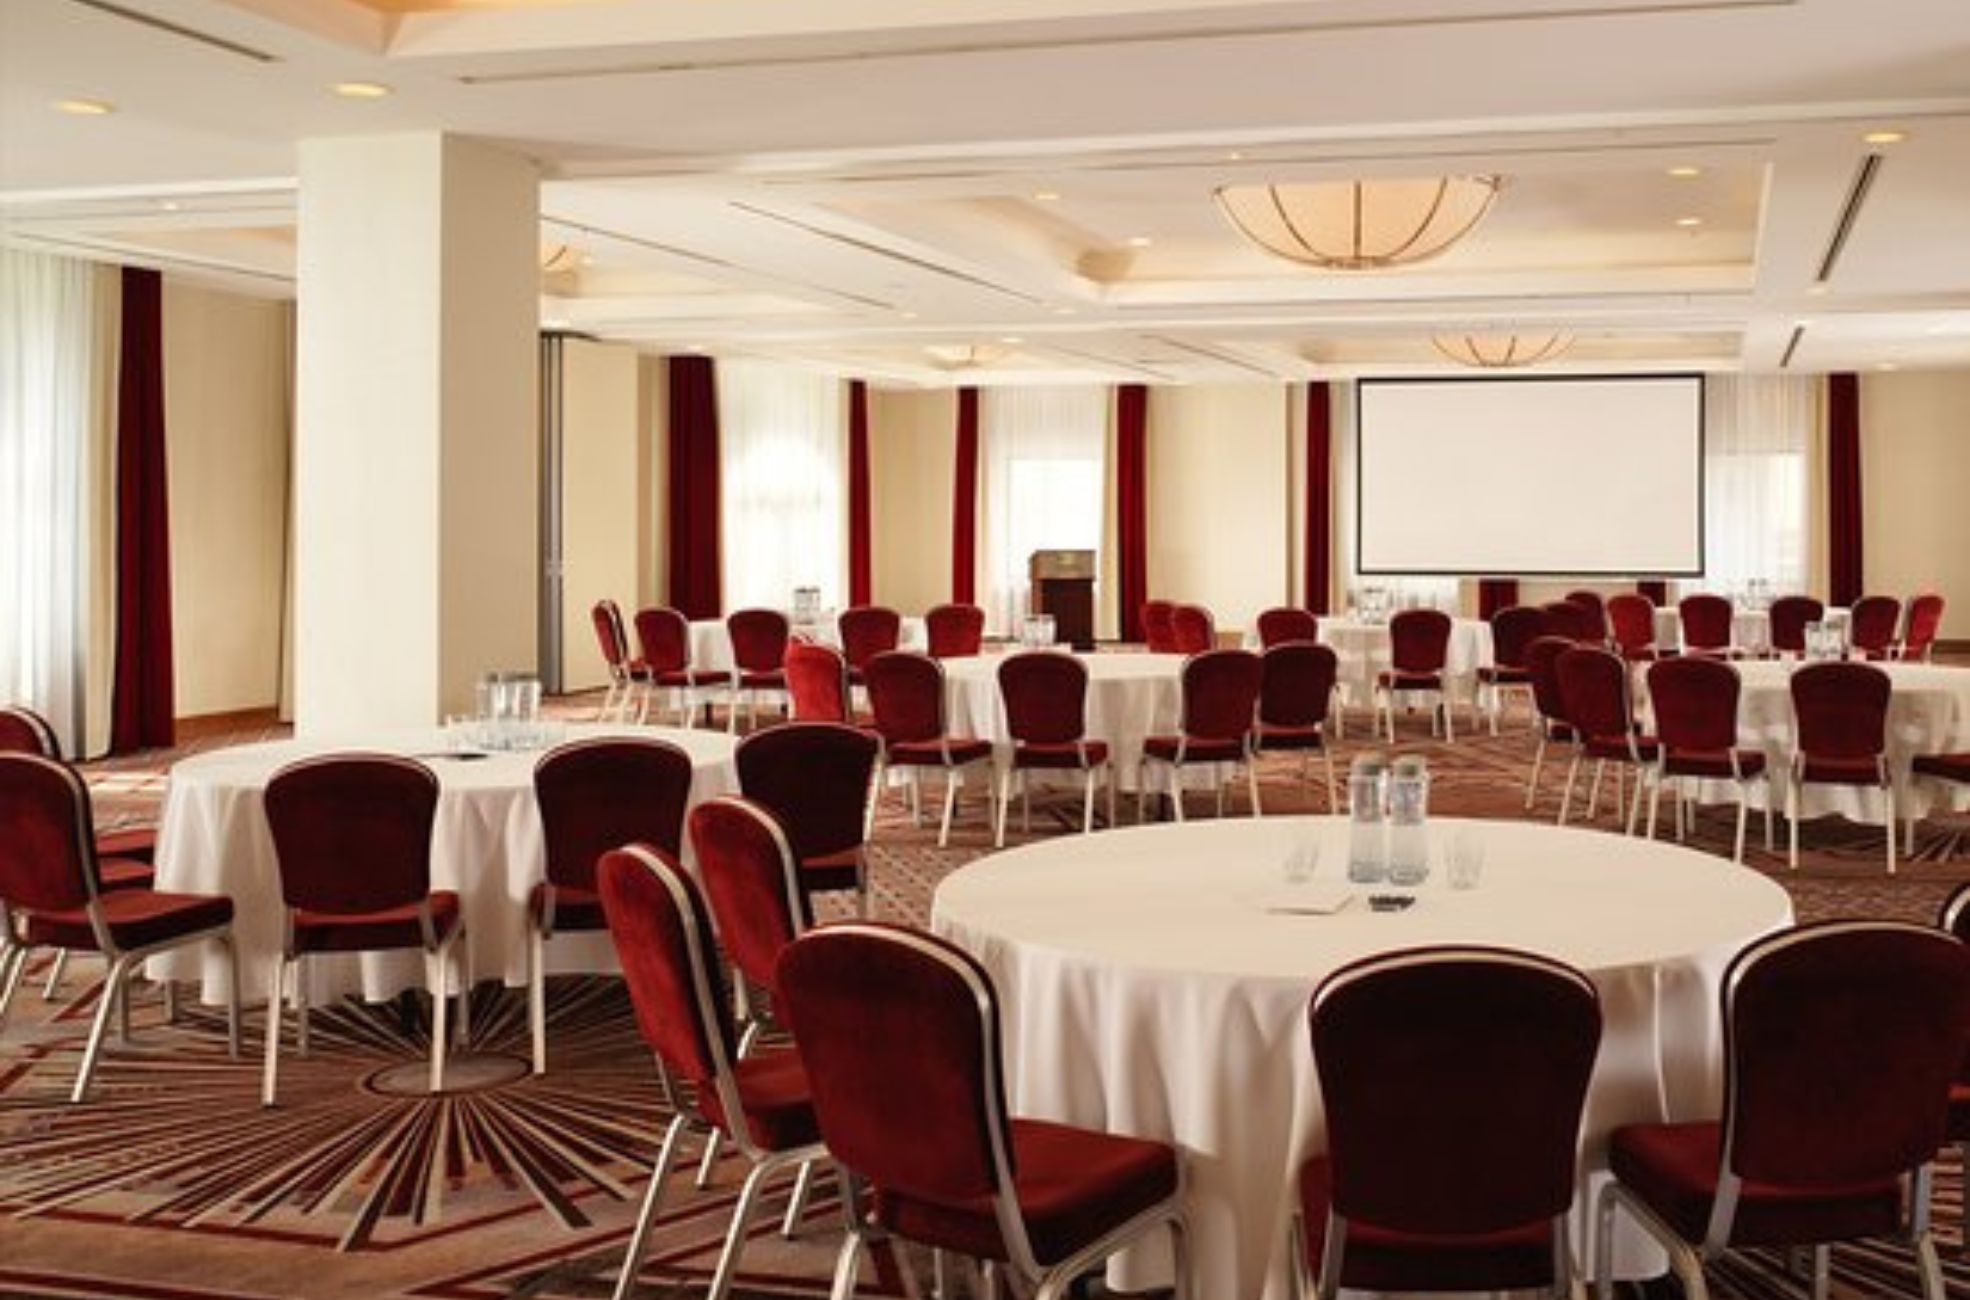 Cabaret-Style Seating For Conference